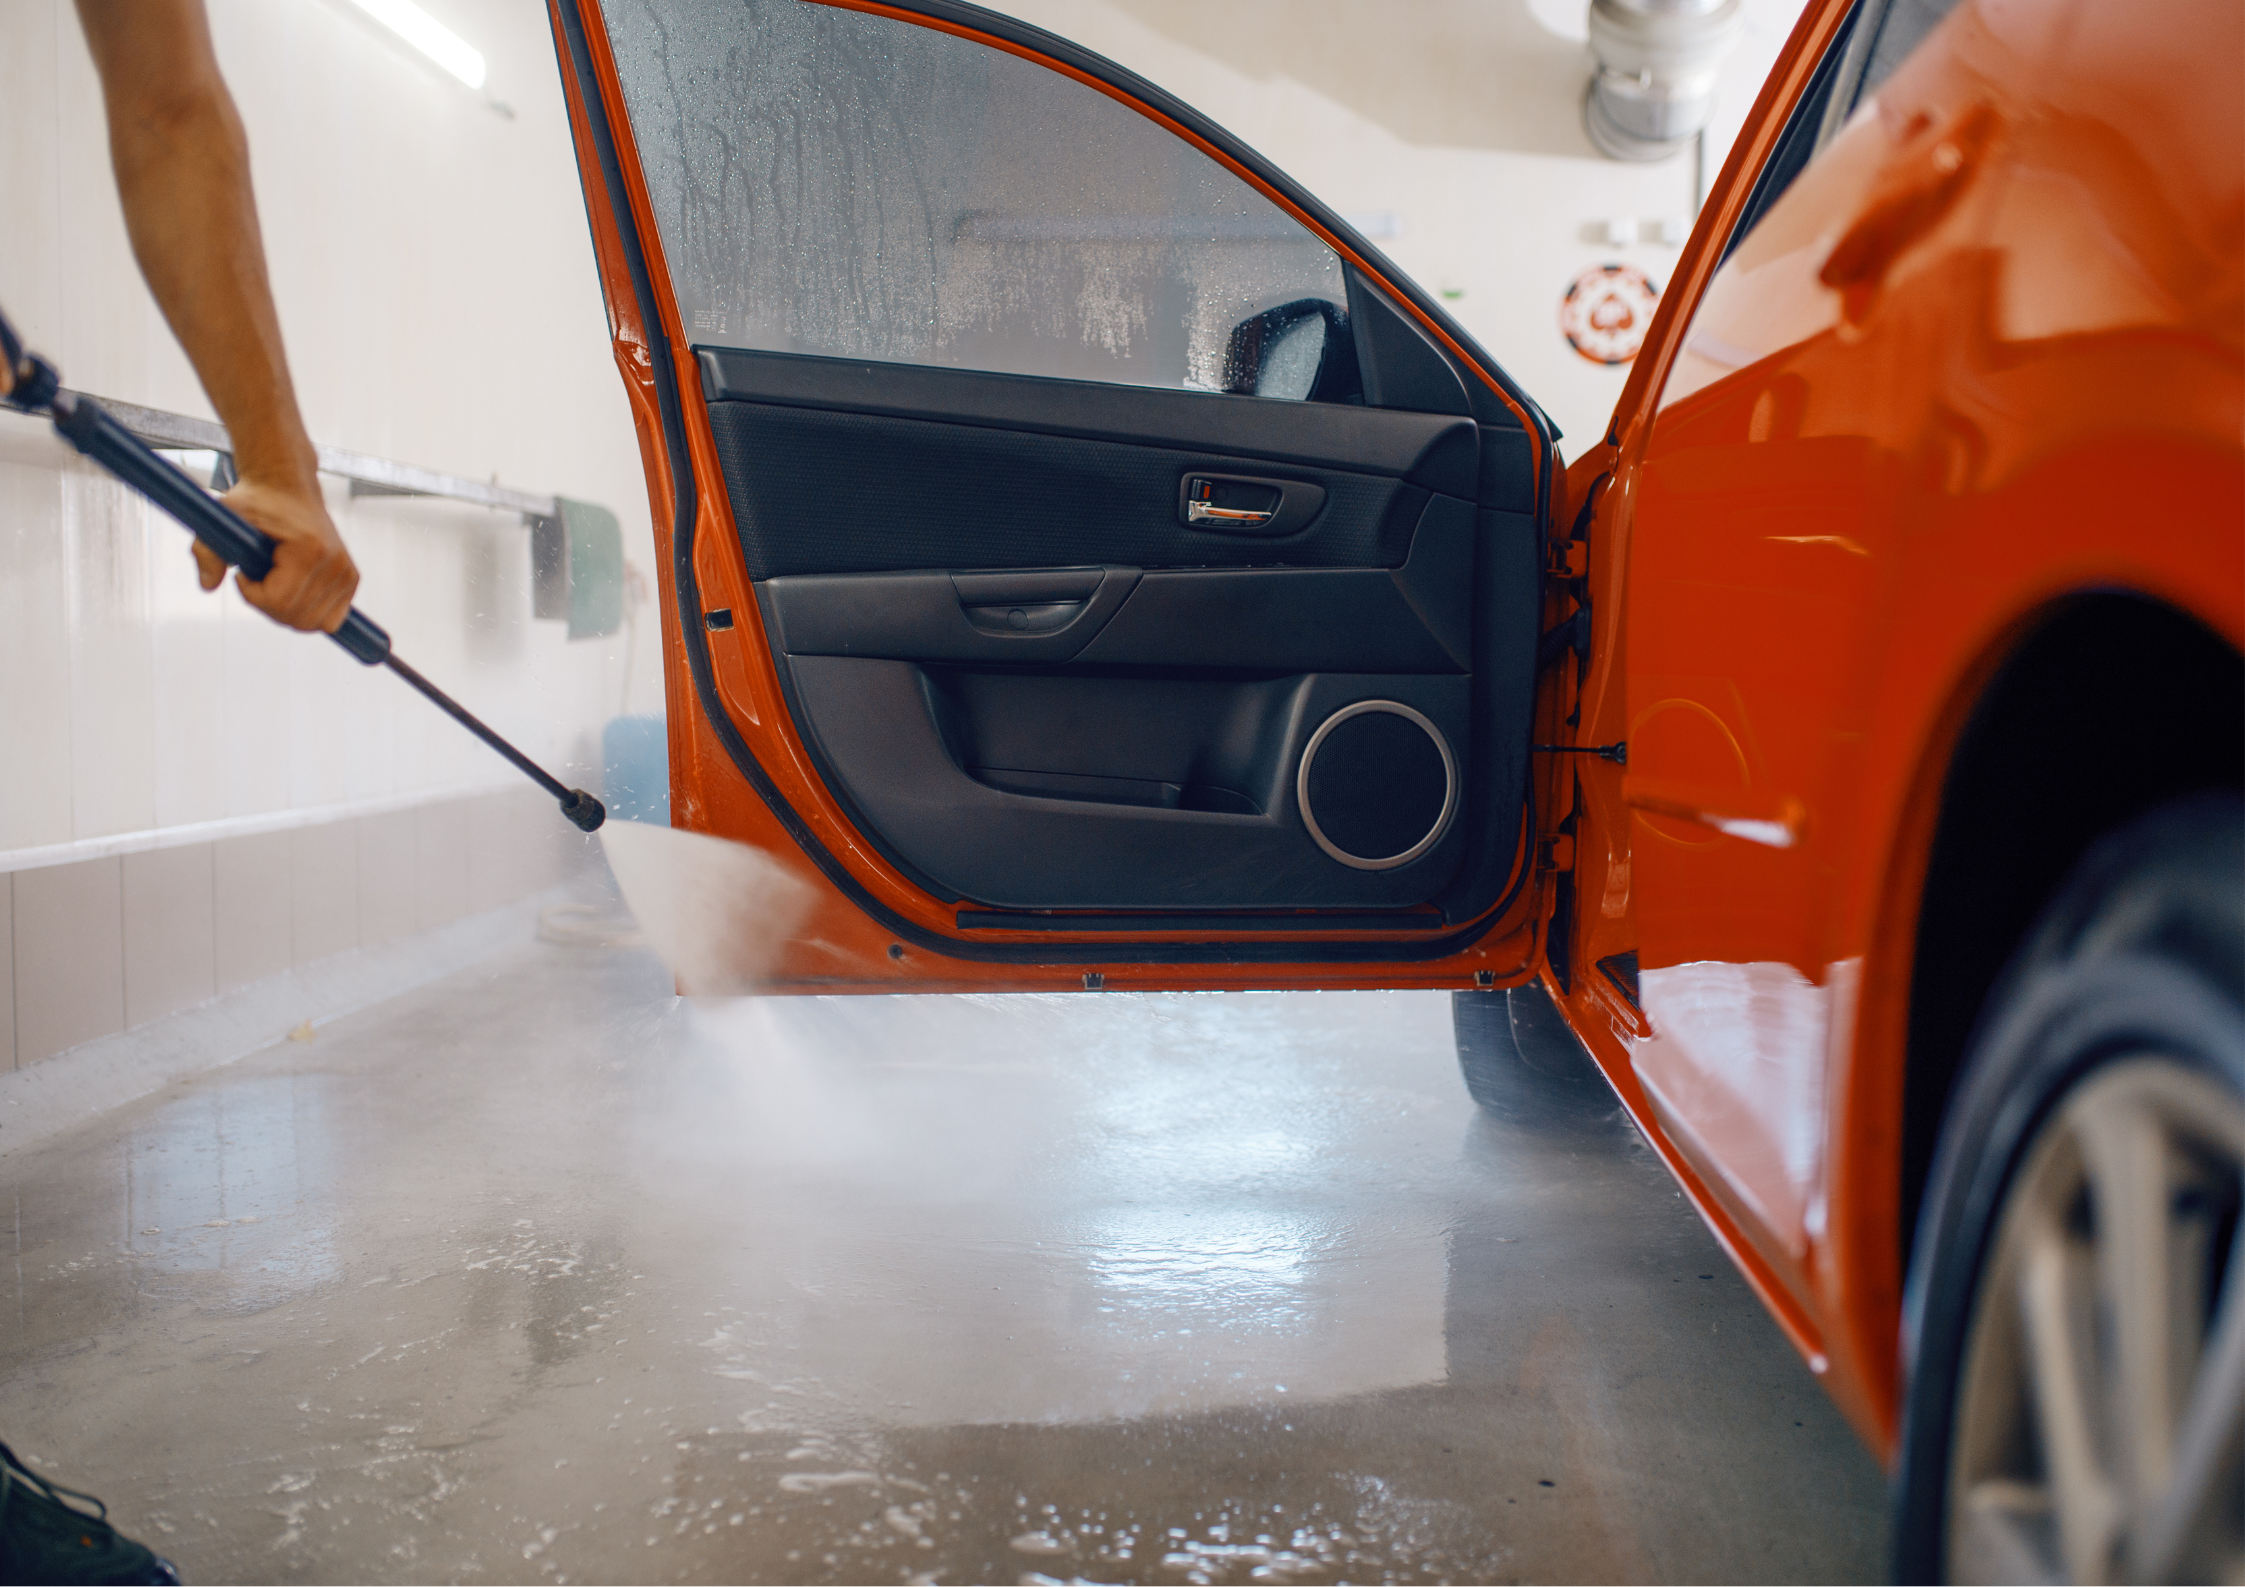 Cordless pressure washers provide the freedom to move around without being restricted by power cords. This enhances your ability to clean hard-to-reach areas and larger spaces without hassle.